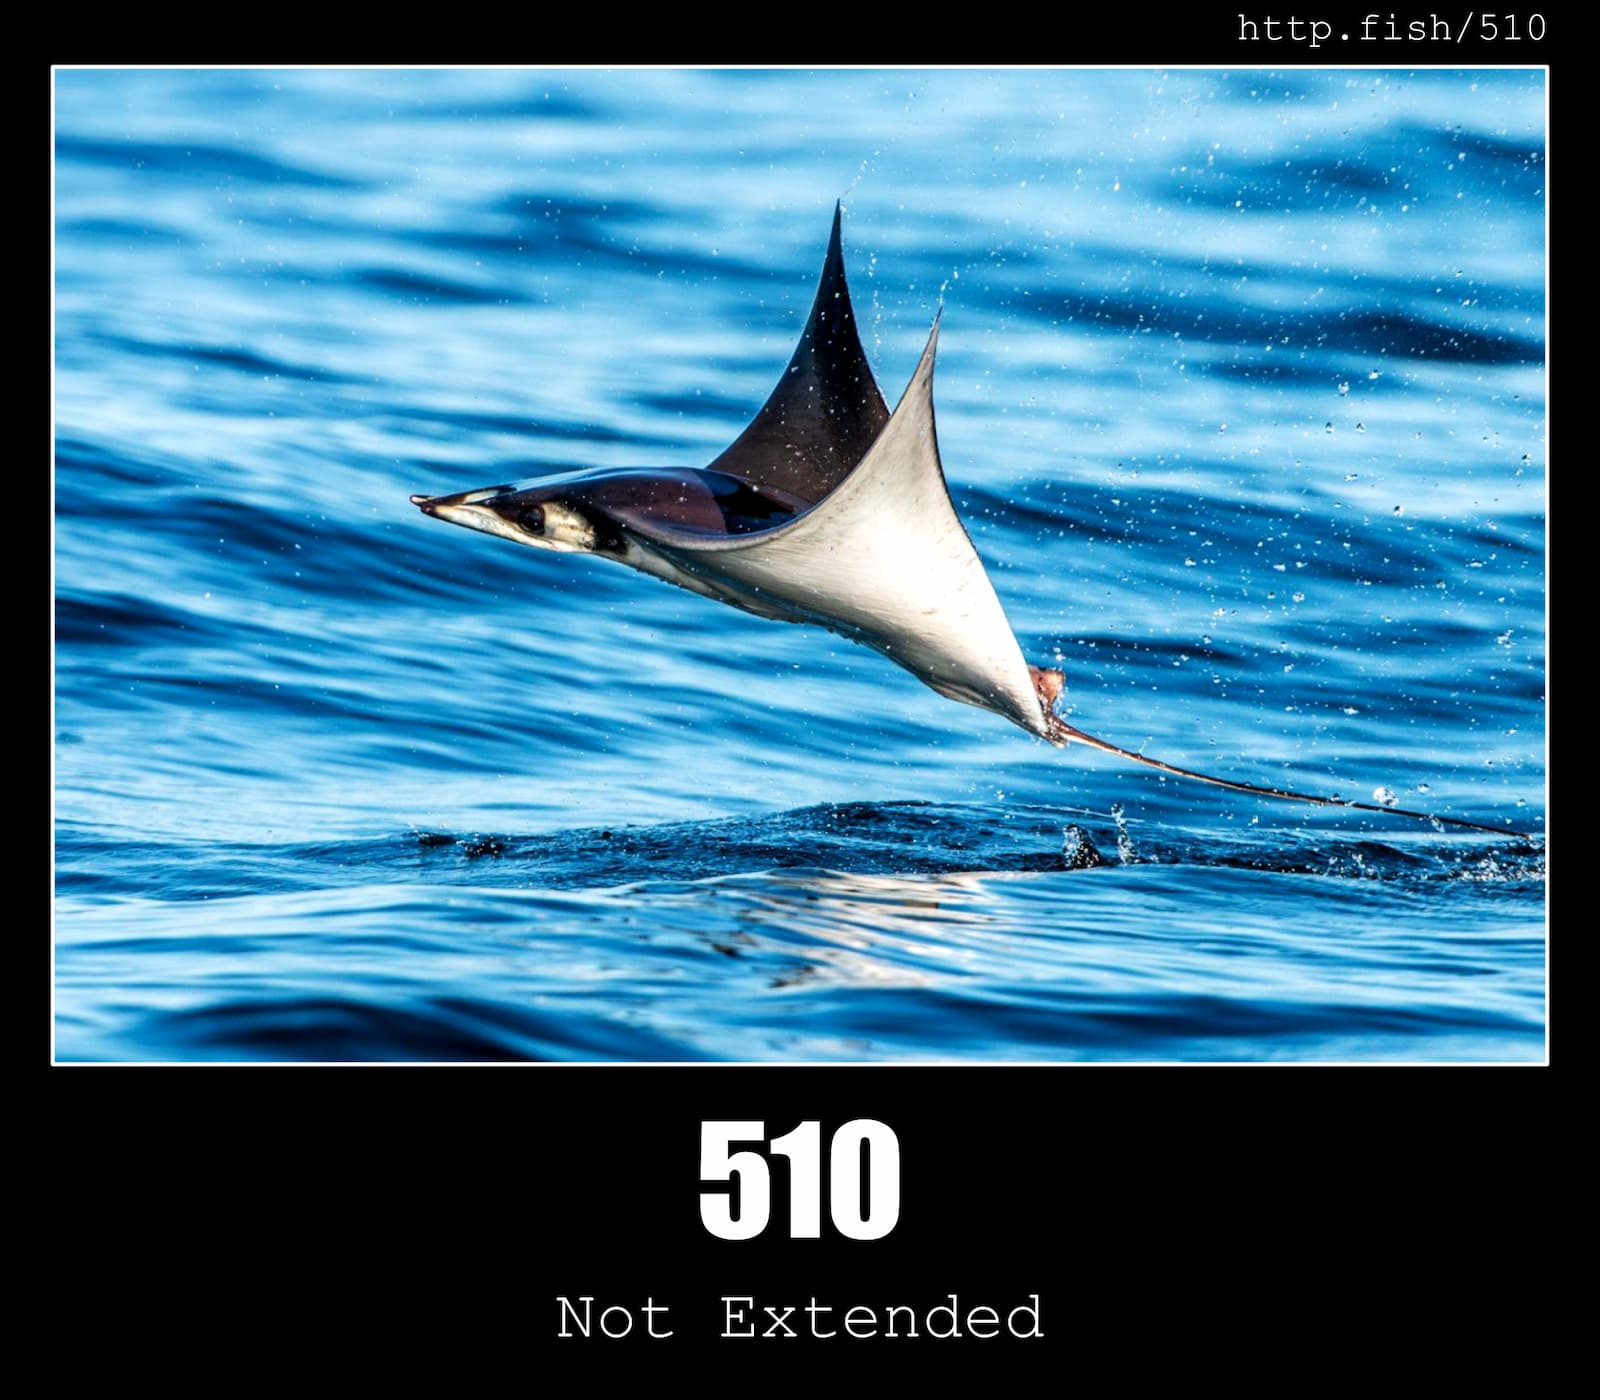 HTTP Status Code 510 Not Extended & Fish